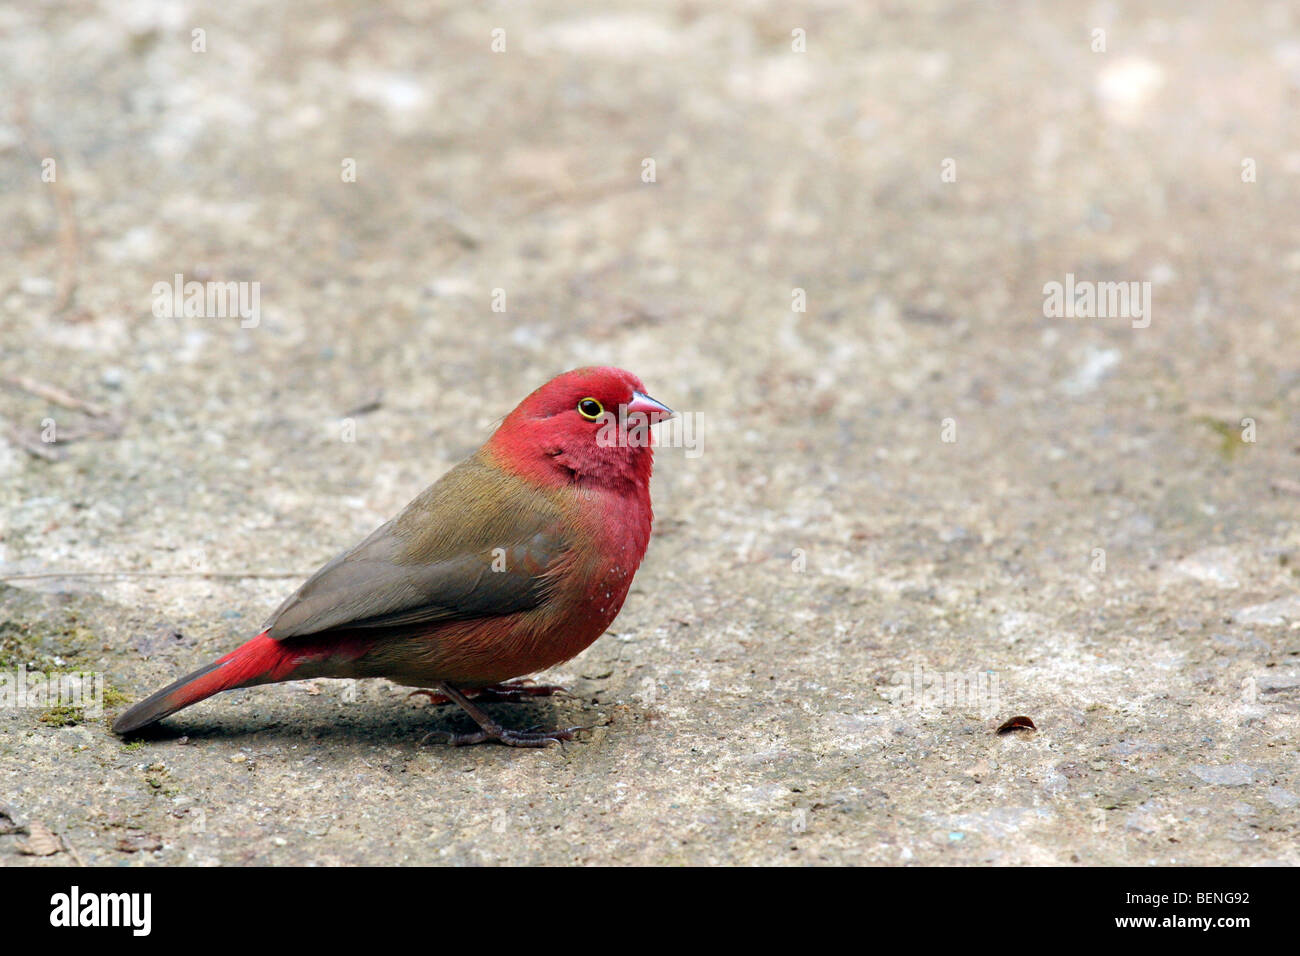 Red-billed Firefinch / Senegal Firefinch (Lagonosticta senegala) foraging on the ground in Ethiopia, East Africa Stock Photo